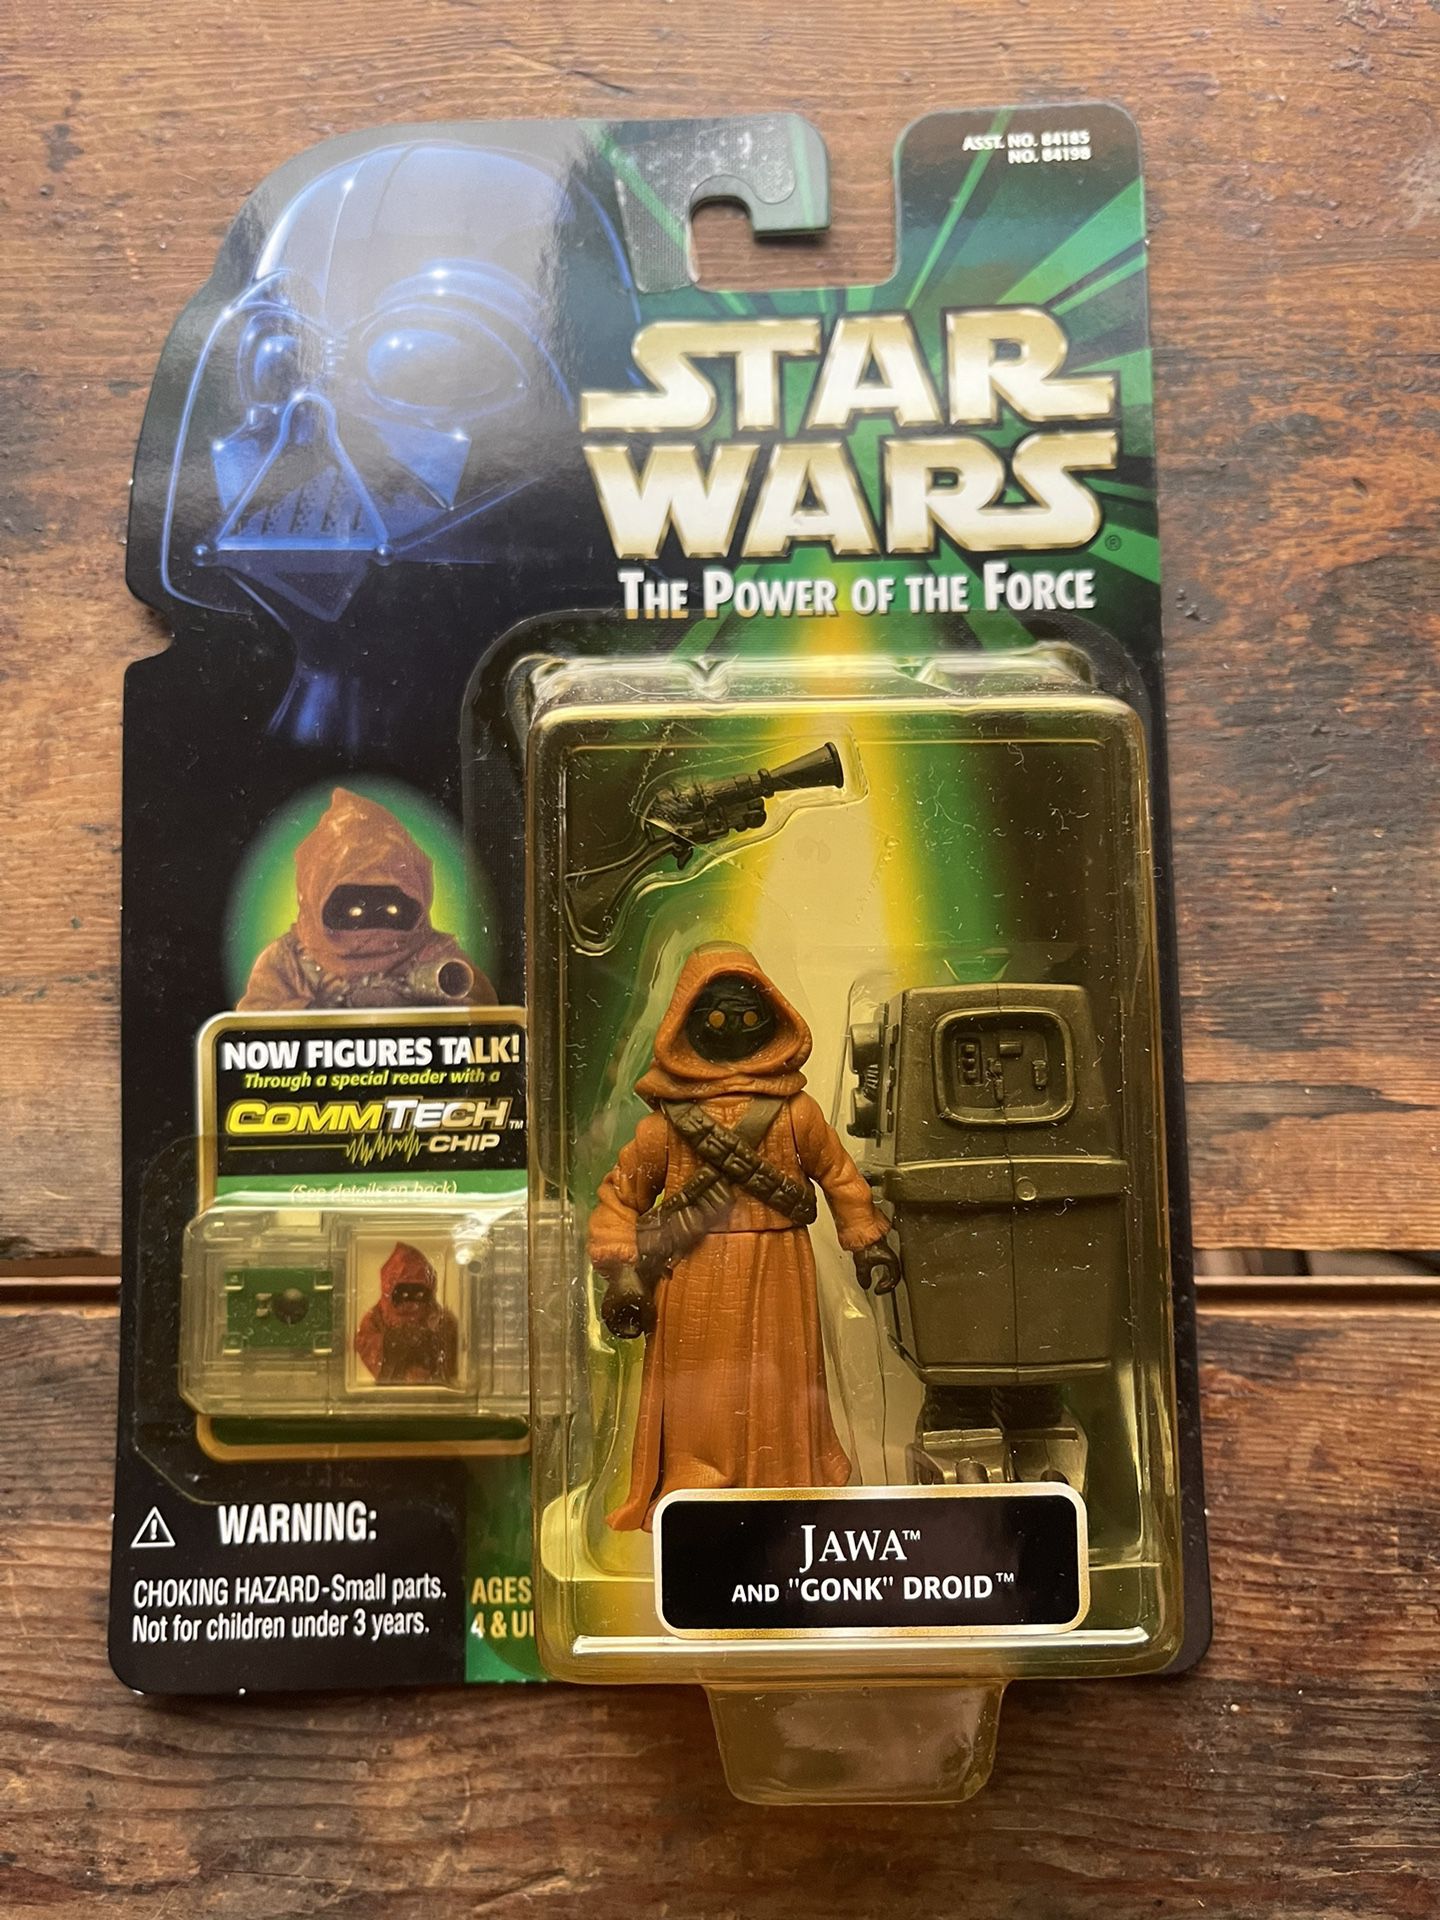 1999 Star Wars Power of the Force Jawa & Gonk Droid Commtech Chip Action Figure